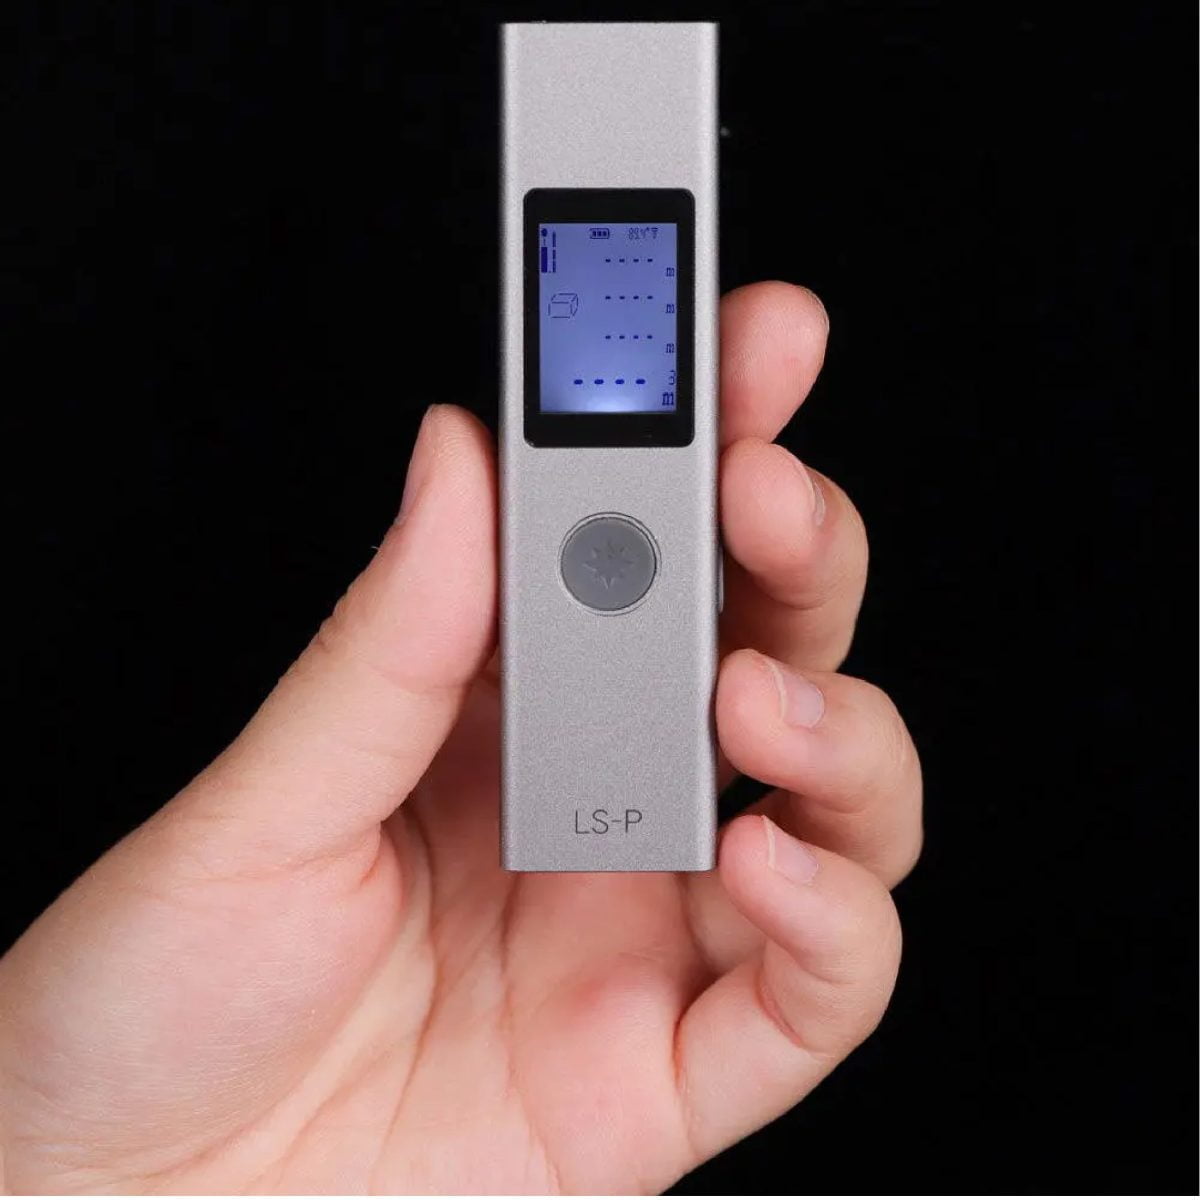 Wewweqs 01 Xiaomi Duka Ls-P 40M Laser Distance Meter Area Volume Angle Pythagorean Laser Rangefinder High Precision Portable Laser Range Finder From Xiaomi Youpin Https://Youtu.be/Acdh957Y-X8 Xiaomi Duka Laser Range Finder 40M Ls-P Portable High Precision Measurement Laser Distance Meter - Gray